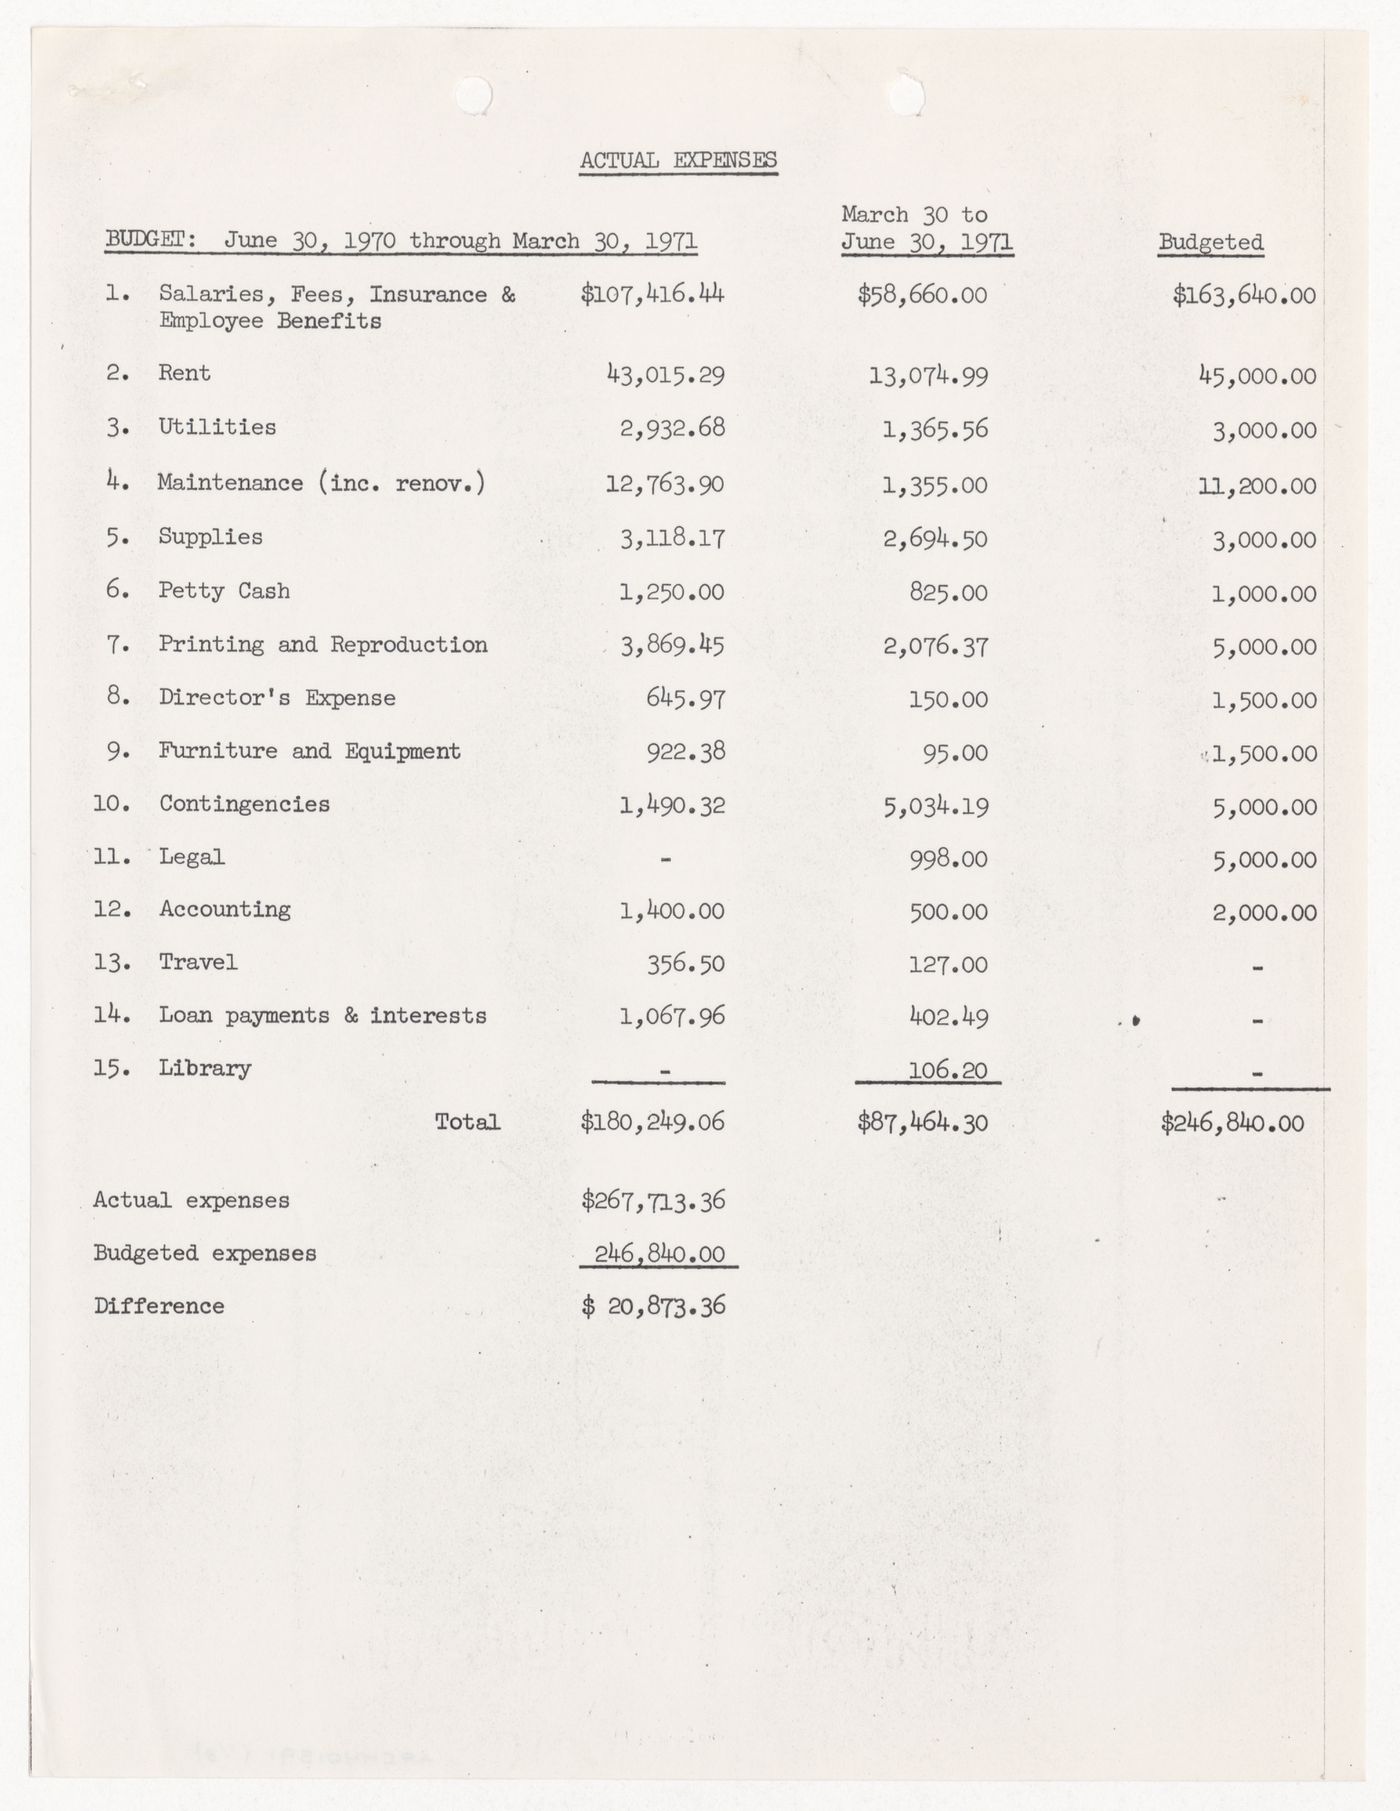 Actual expenses and budget information from June 30th, 1970 to March 30th, 1971